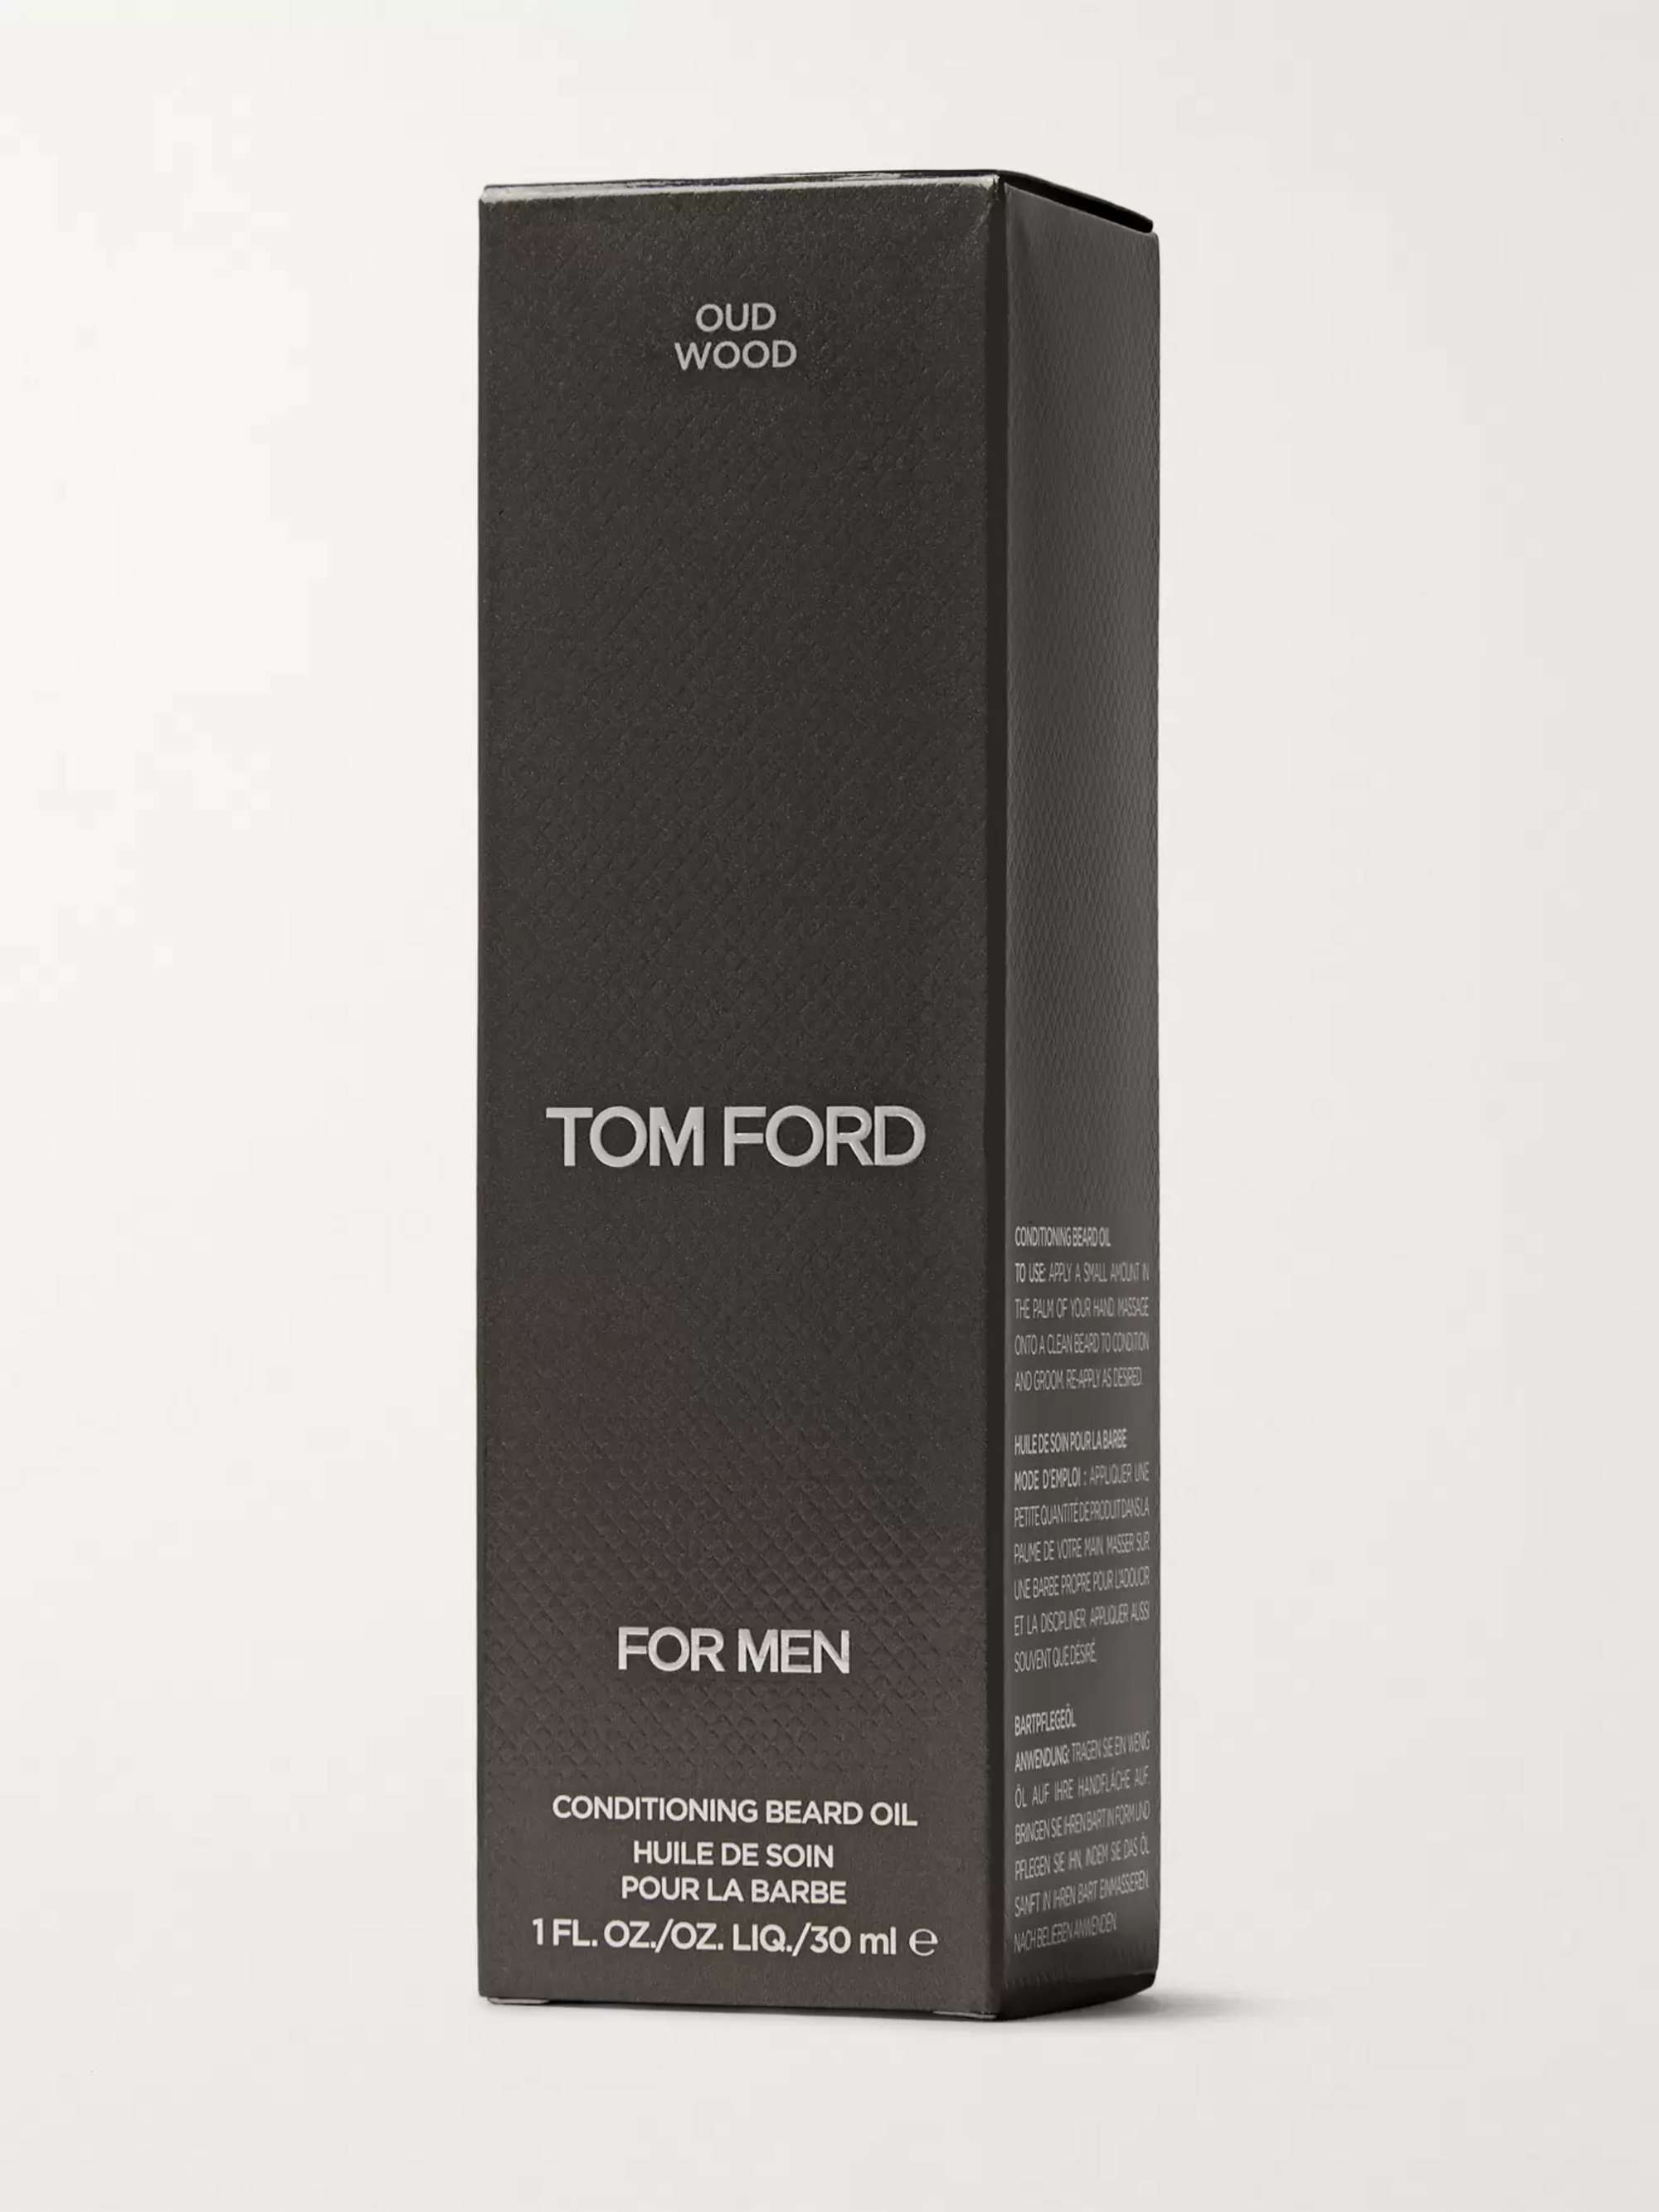 TOM FORD BEAUTY Oud Wood Conditioning Beard Oil, 30ml